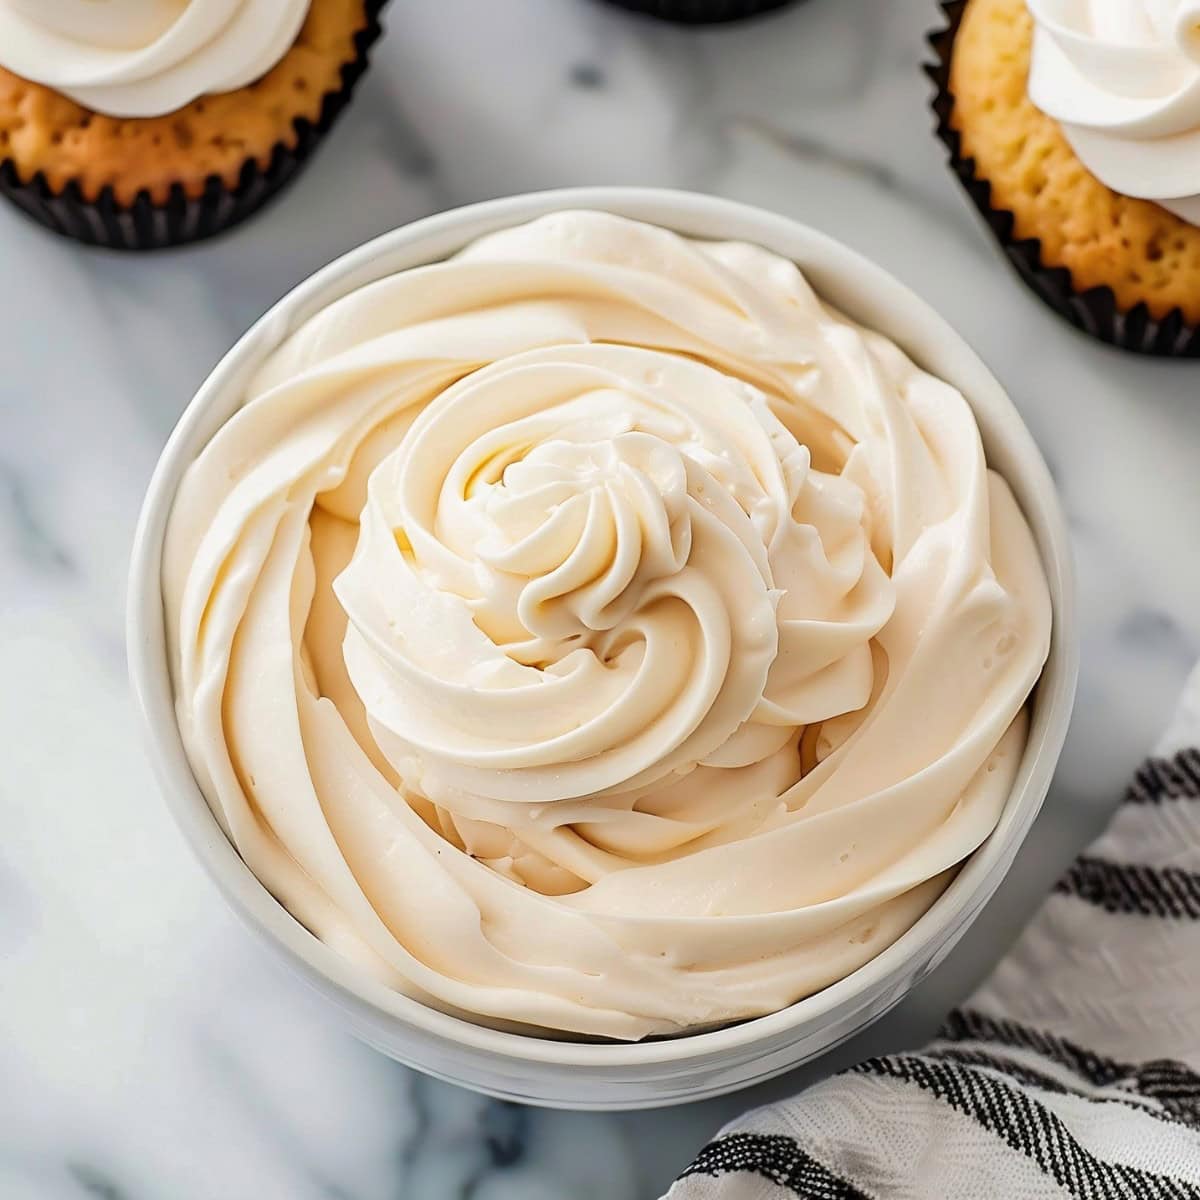 A white bowl filled with peanut butter whipped cream next to cupcakes